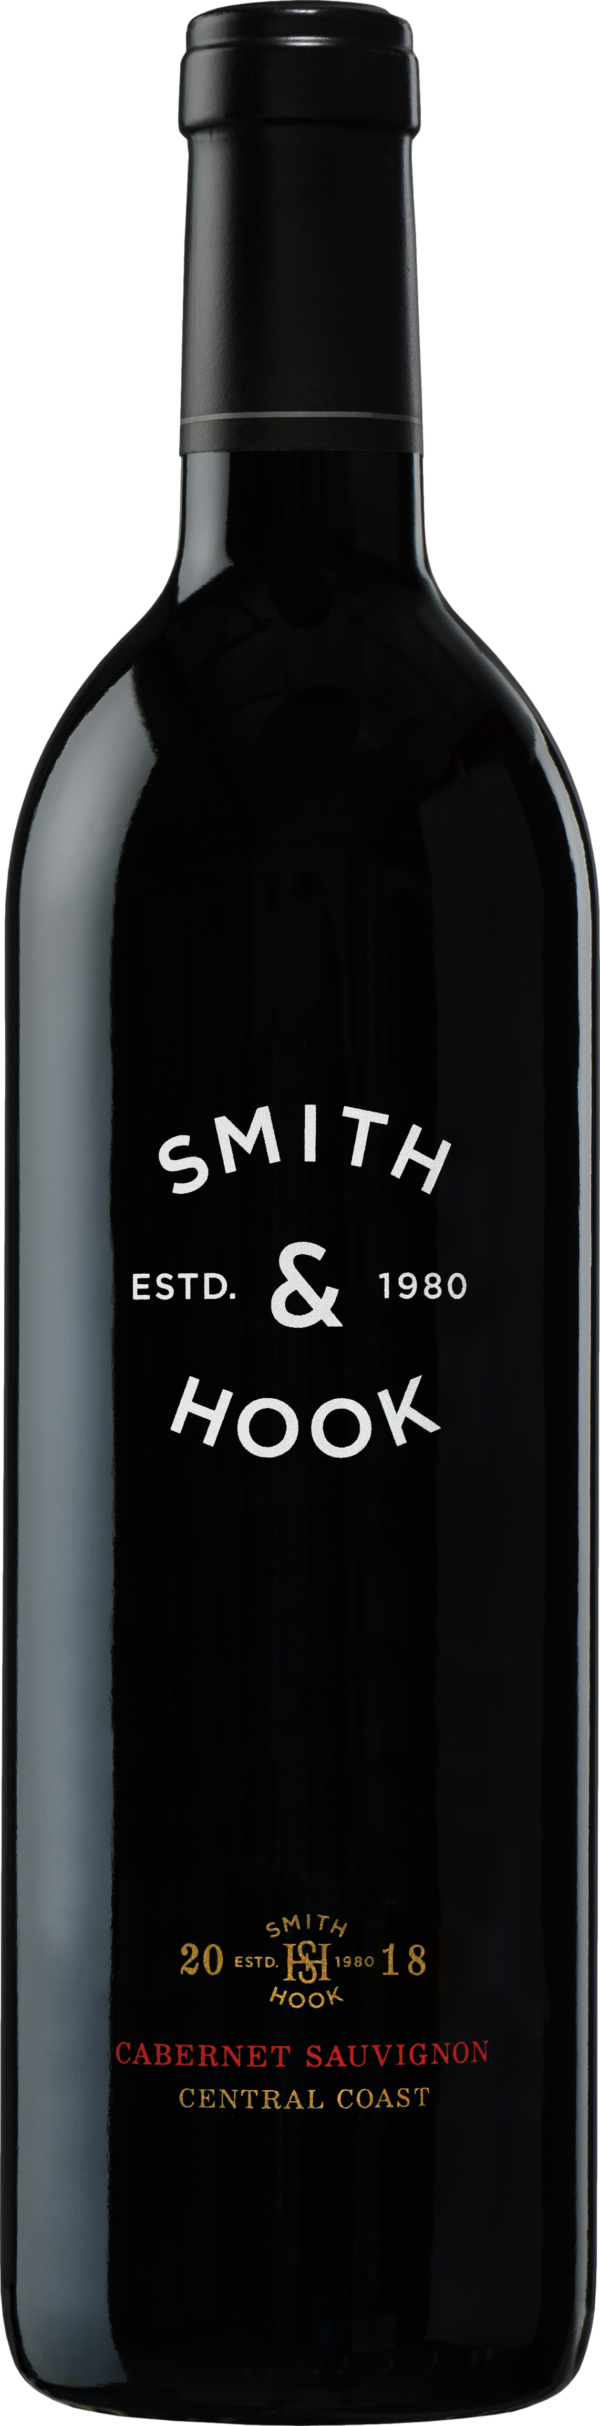 Product image of Smith & Hook Cabernet Sauvignon 2018 from 8wines